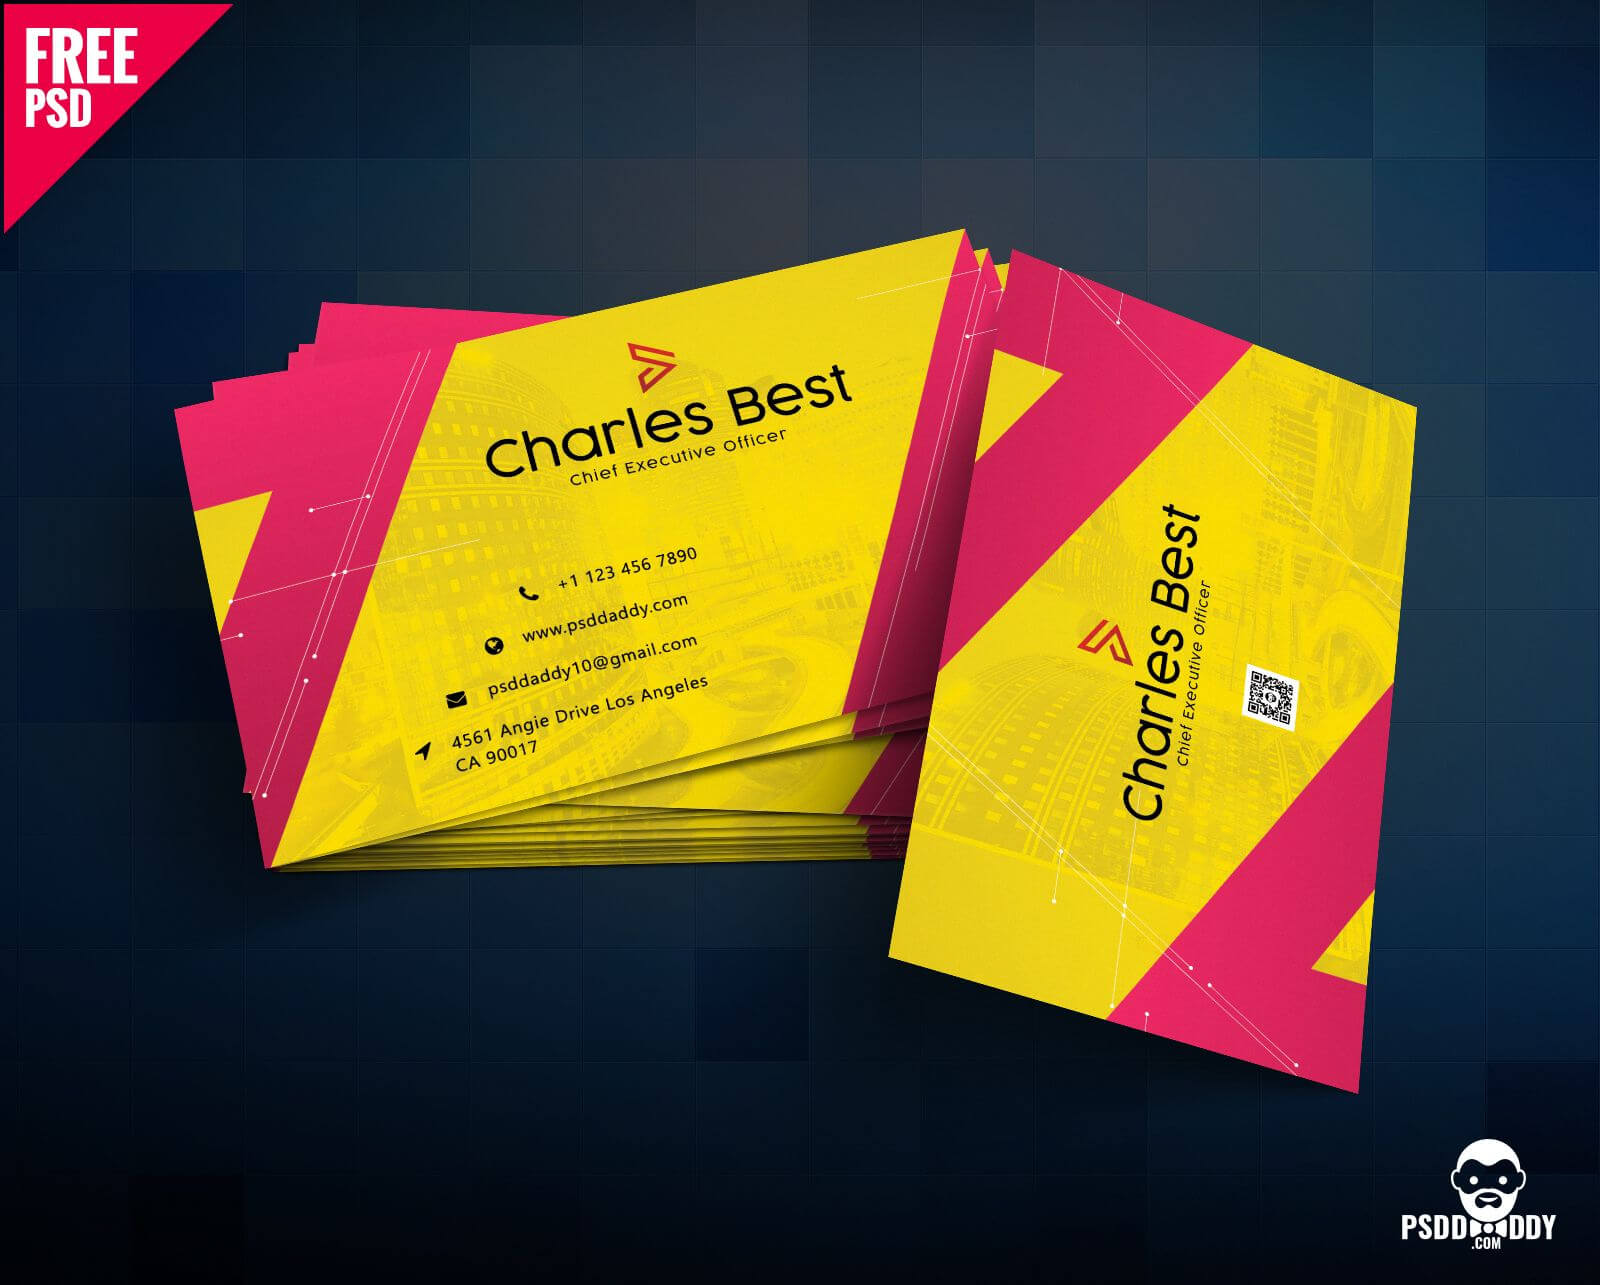 Download] Creative Business Card Free Psd | Psddaddy Throughout Psd Visiting Card Templates